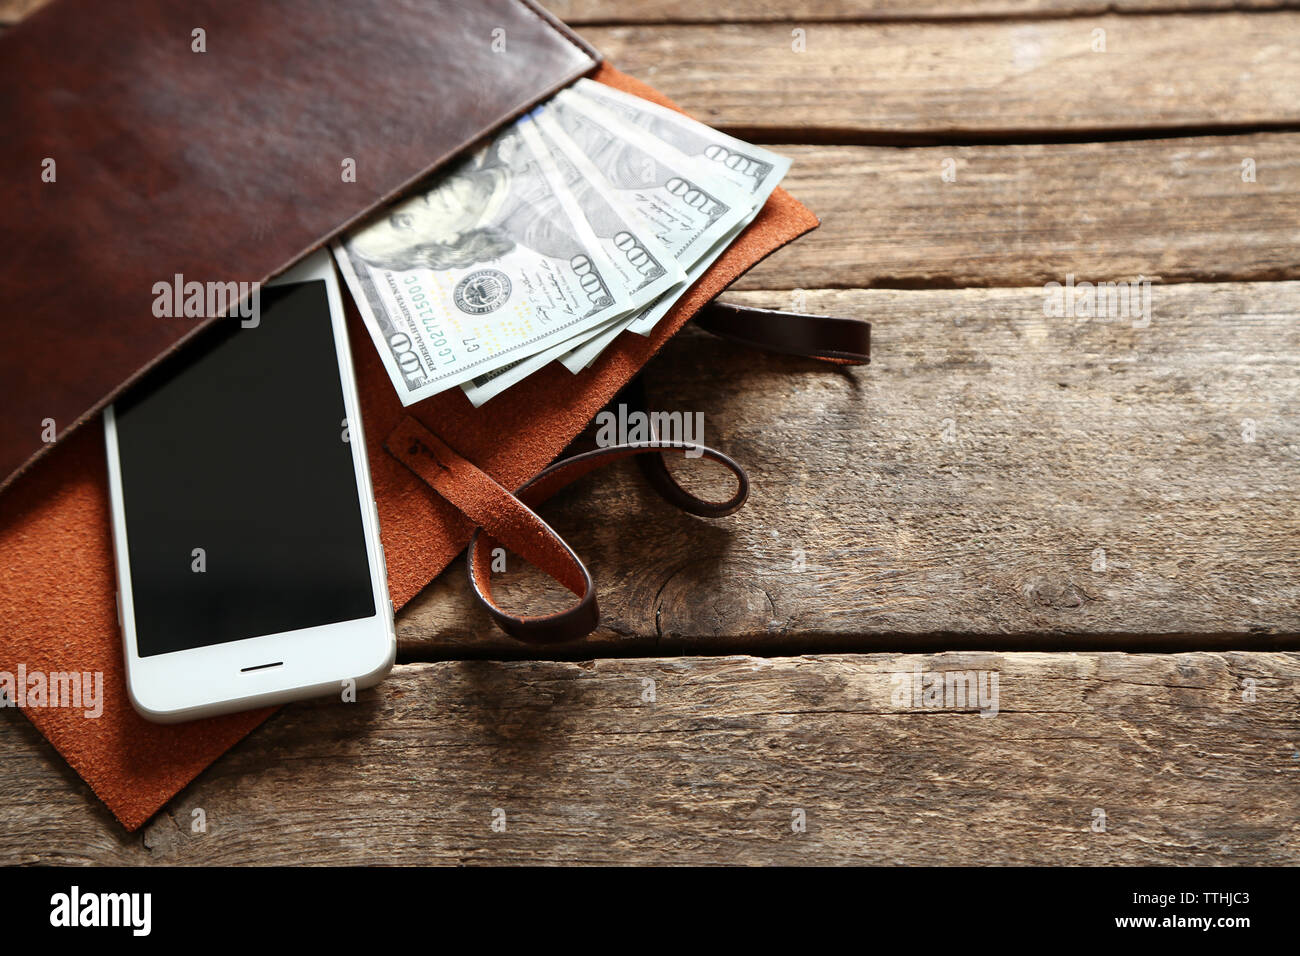 Leather purse with mobile phone and dollar banknotes on wooden table Stock Photo